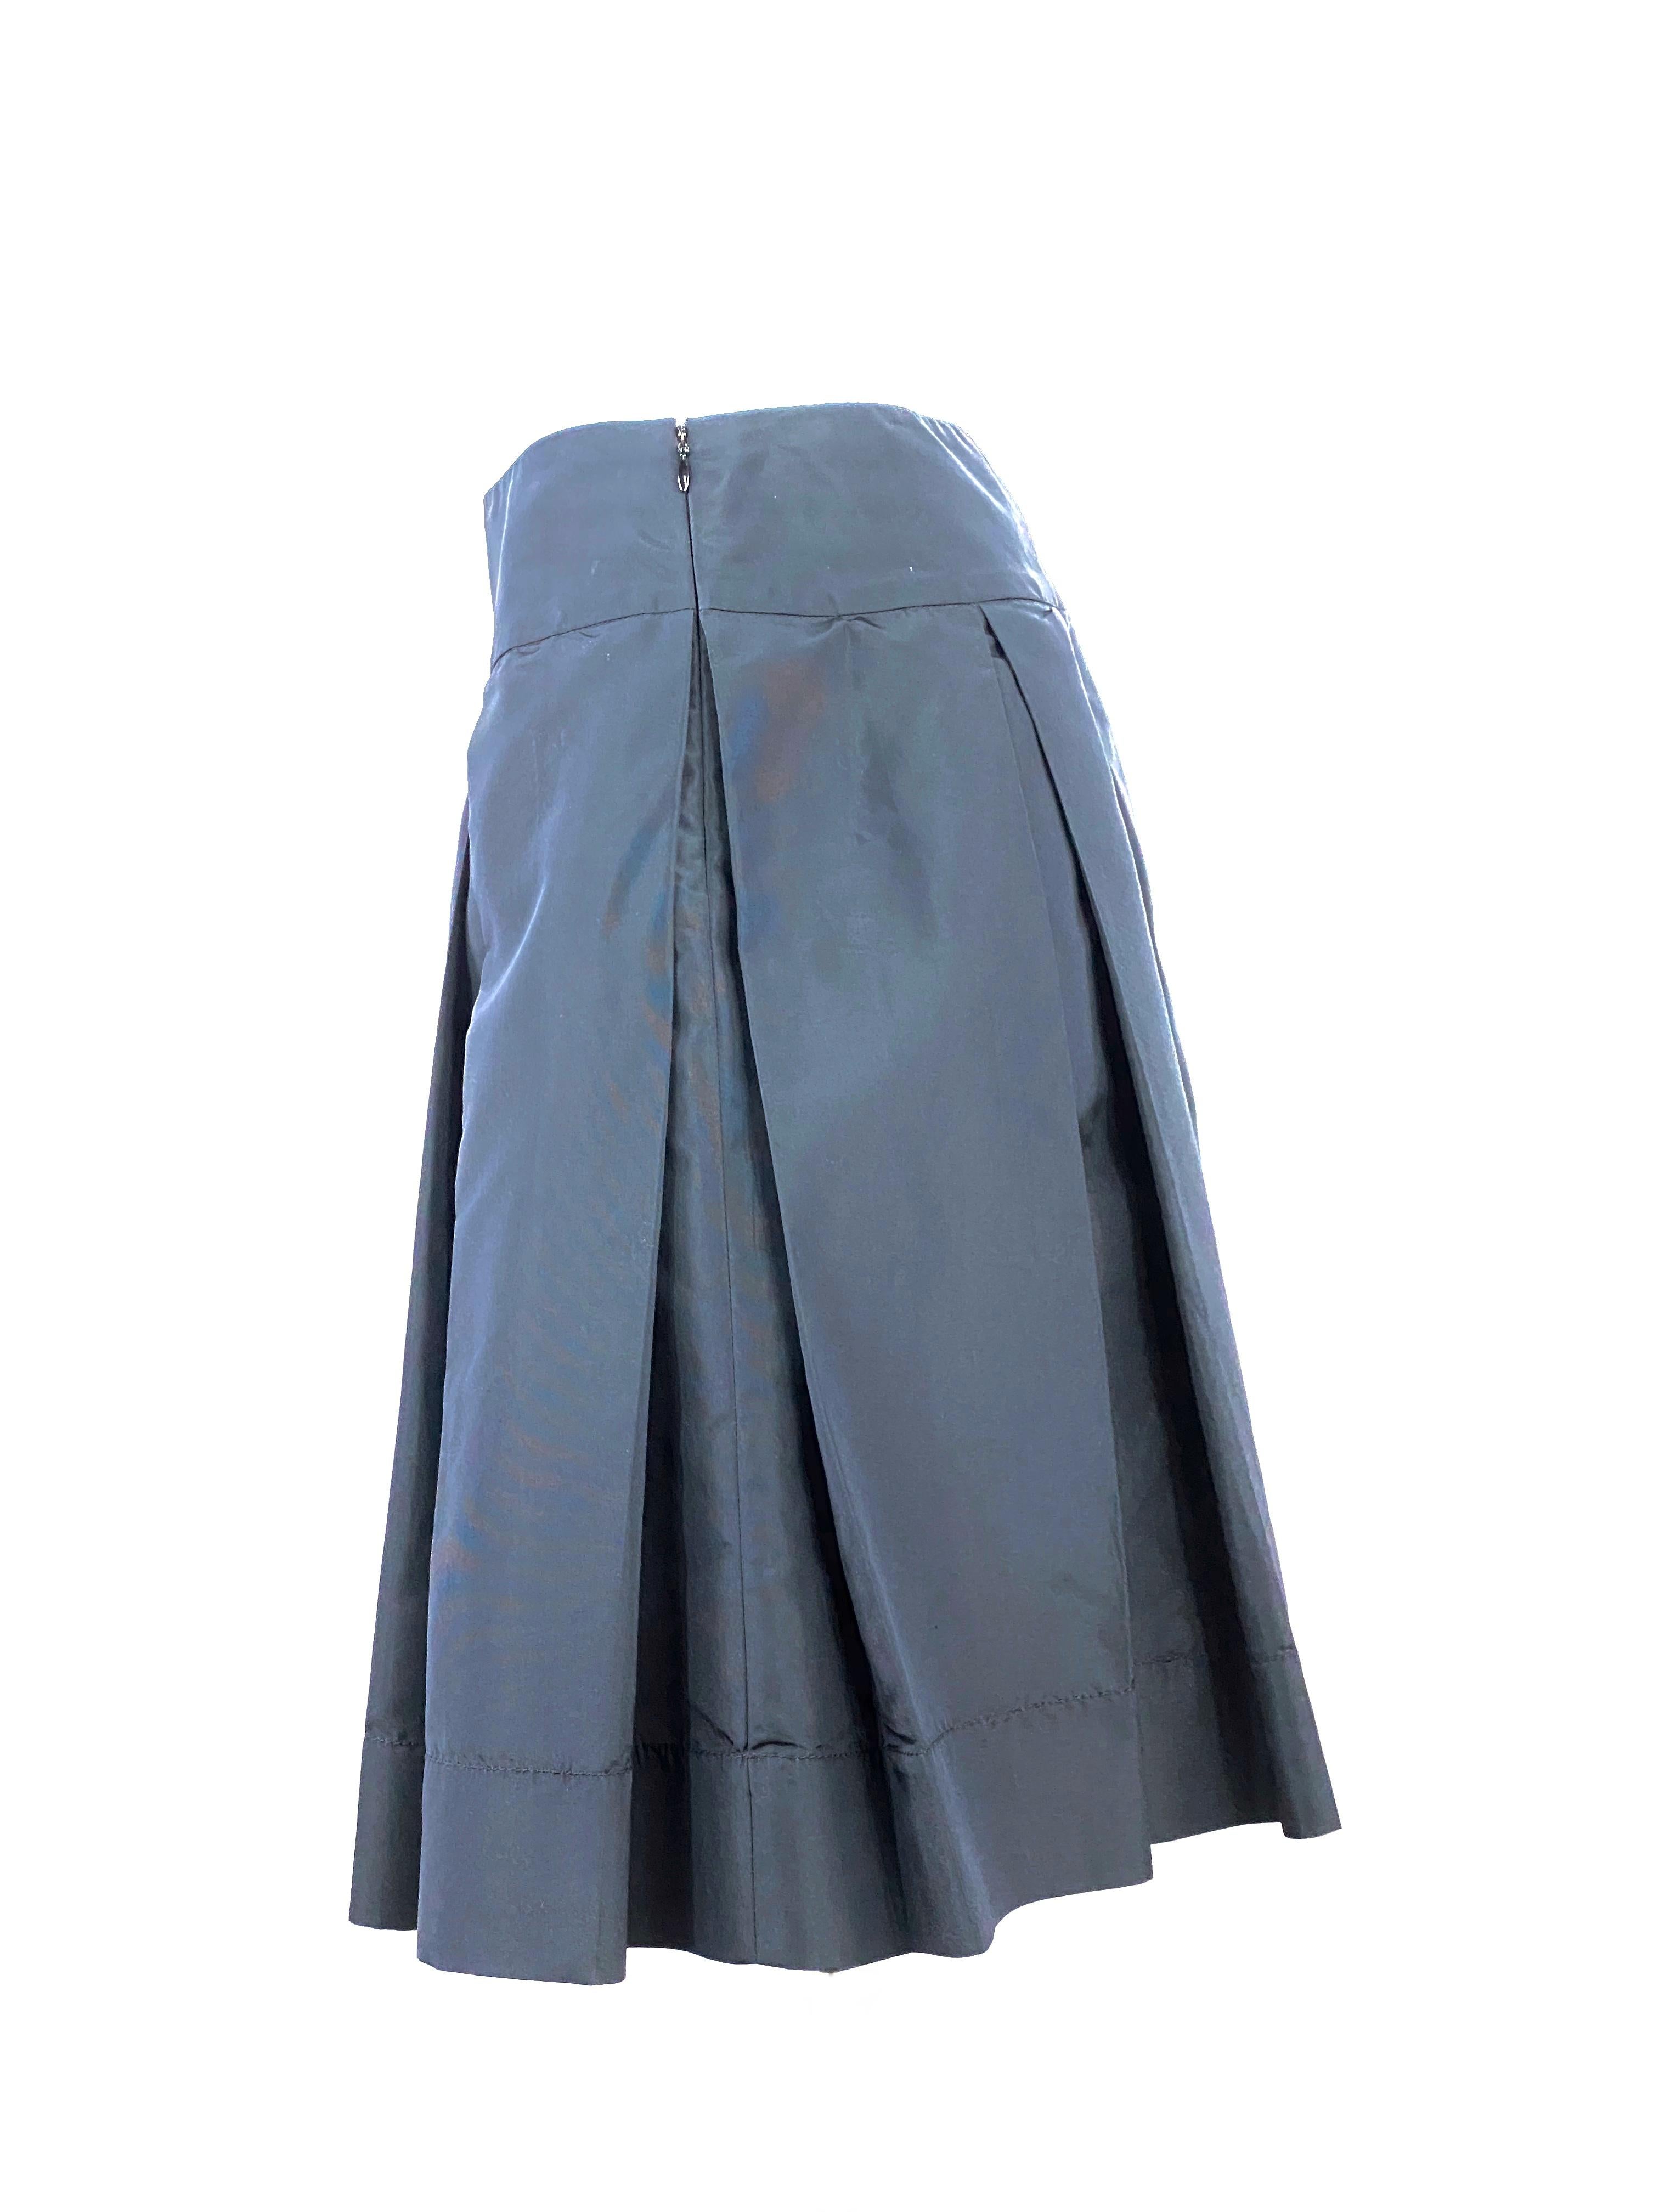 PRADA Black Flare Midi Skirt Size 40

Product details:
Size 40
Black color
Flare style
Midi length 
Size zipper and hook closure
Made in Italy
